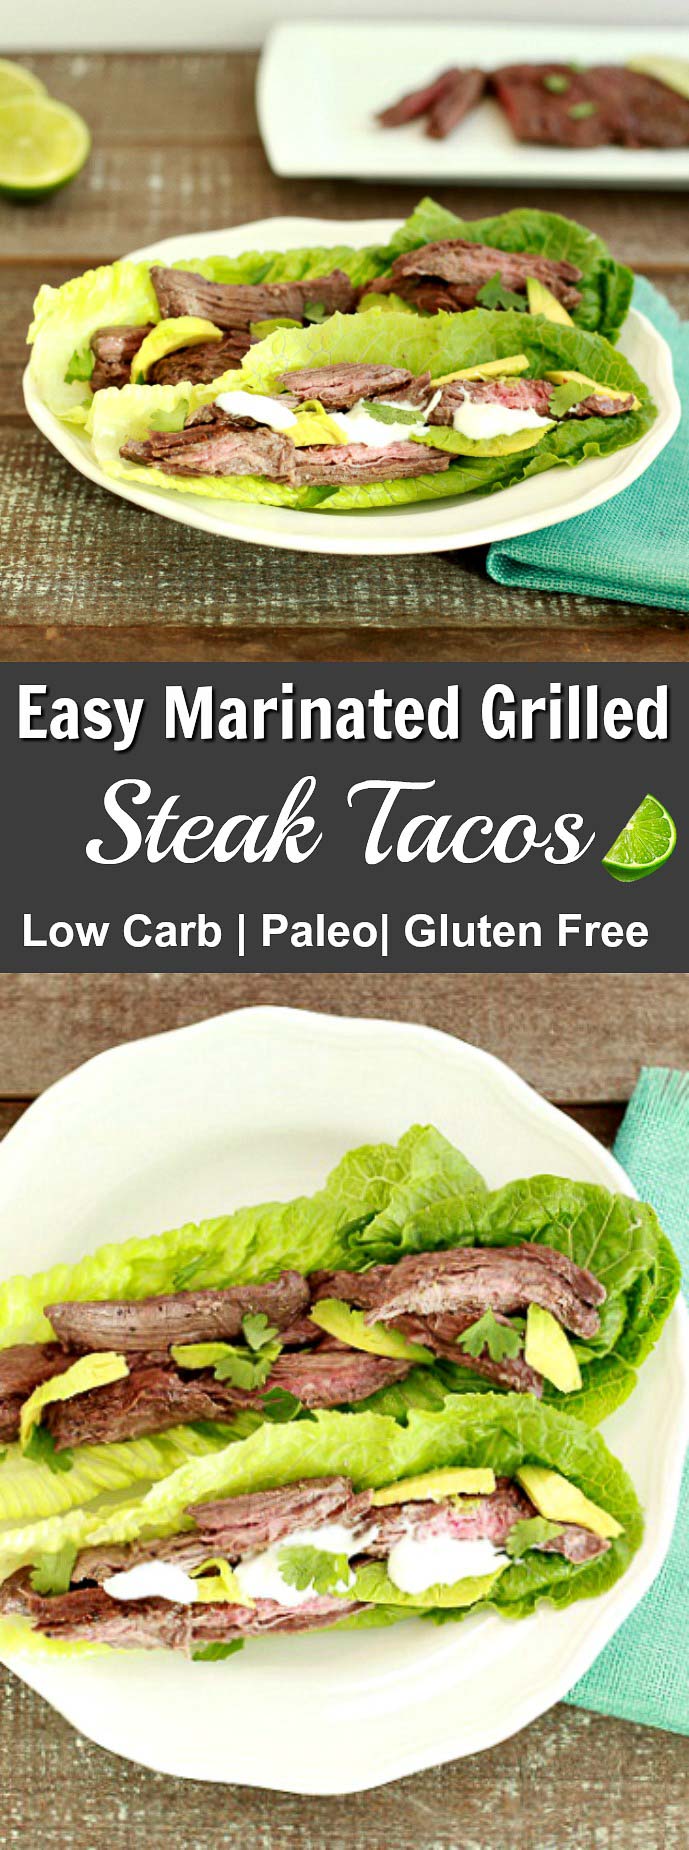 Easy Marinated Grilled Steak Tacos, grain free, paleo and low carb